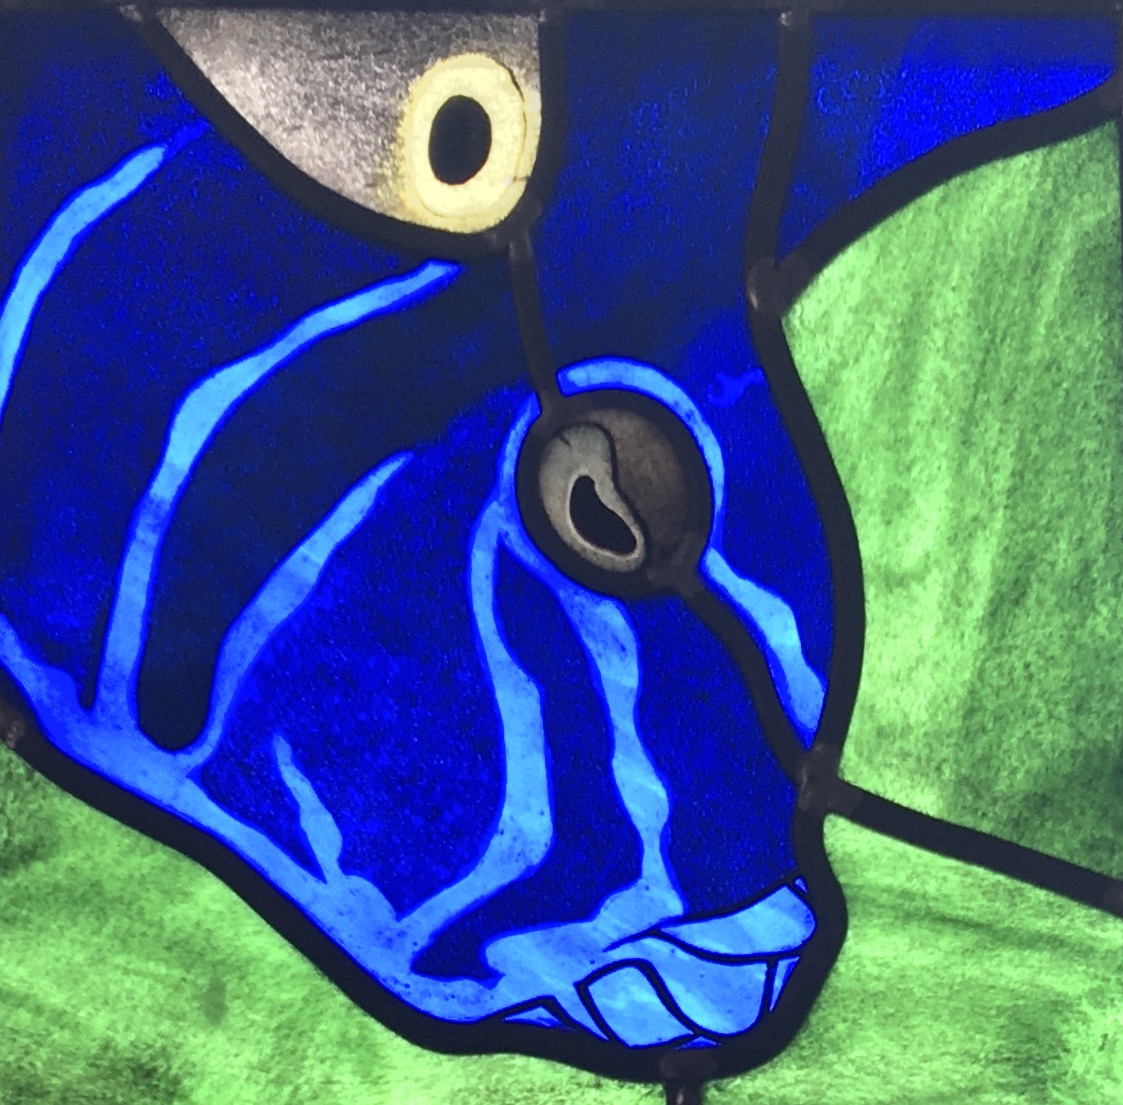 With your third eye, oh Angel blue, can you see all that is meant for you? Earspot Angel Fish – Seychelles